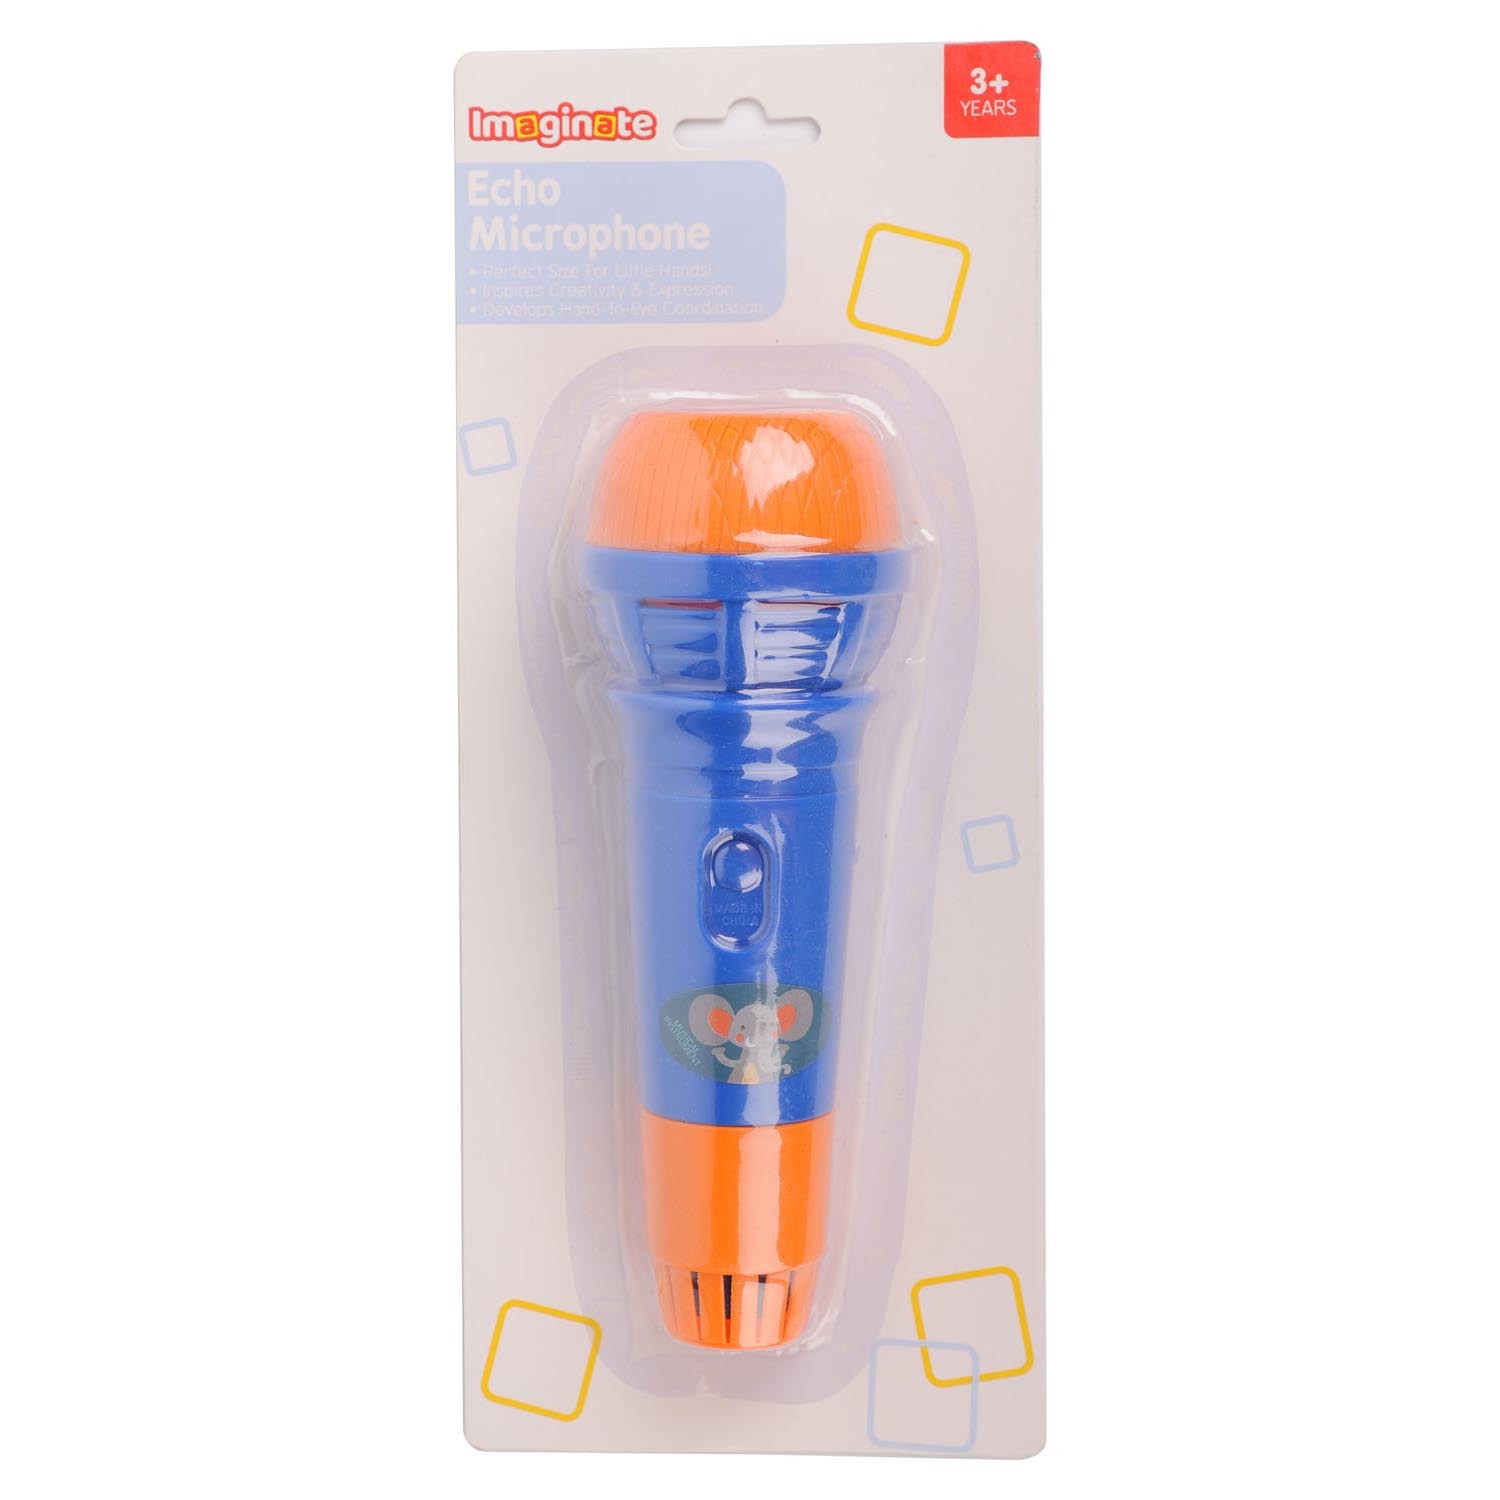 Imaginate Echo Microphone Toy Image